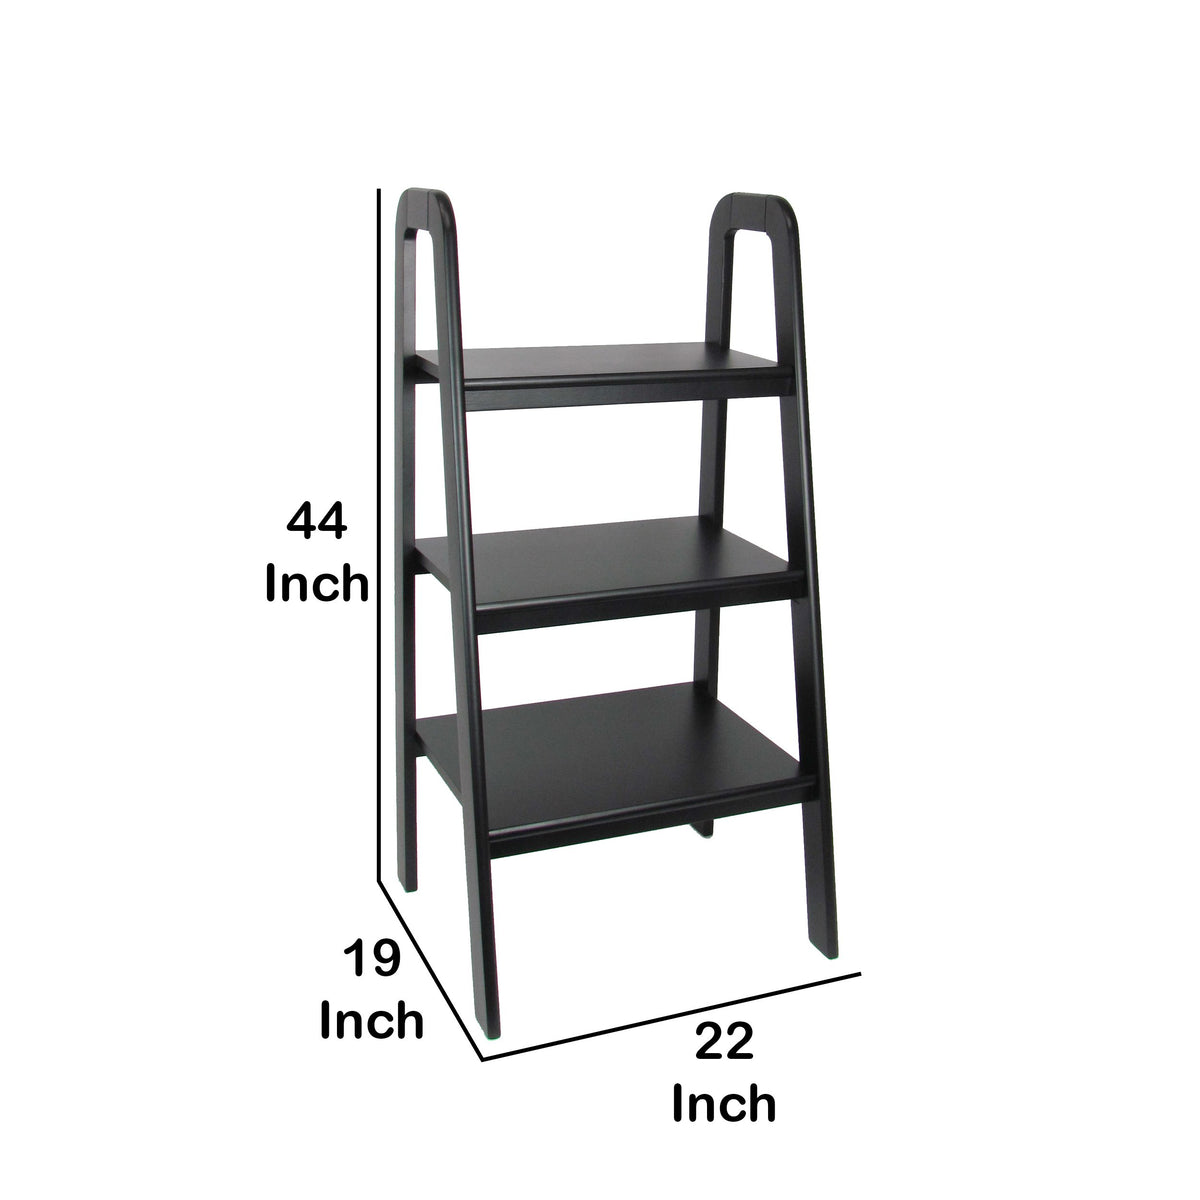 3 Tier Wooden Storage Ladder Stand with Open Back and Sides, Black - BM210420